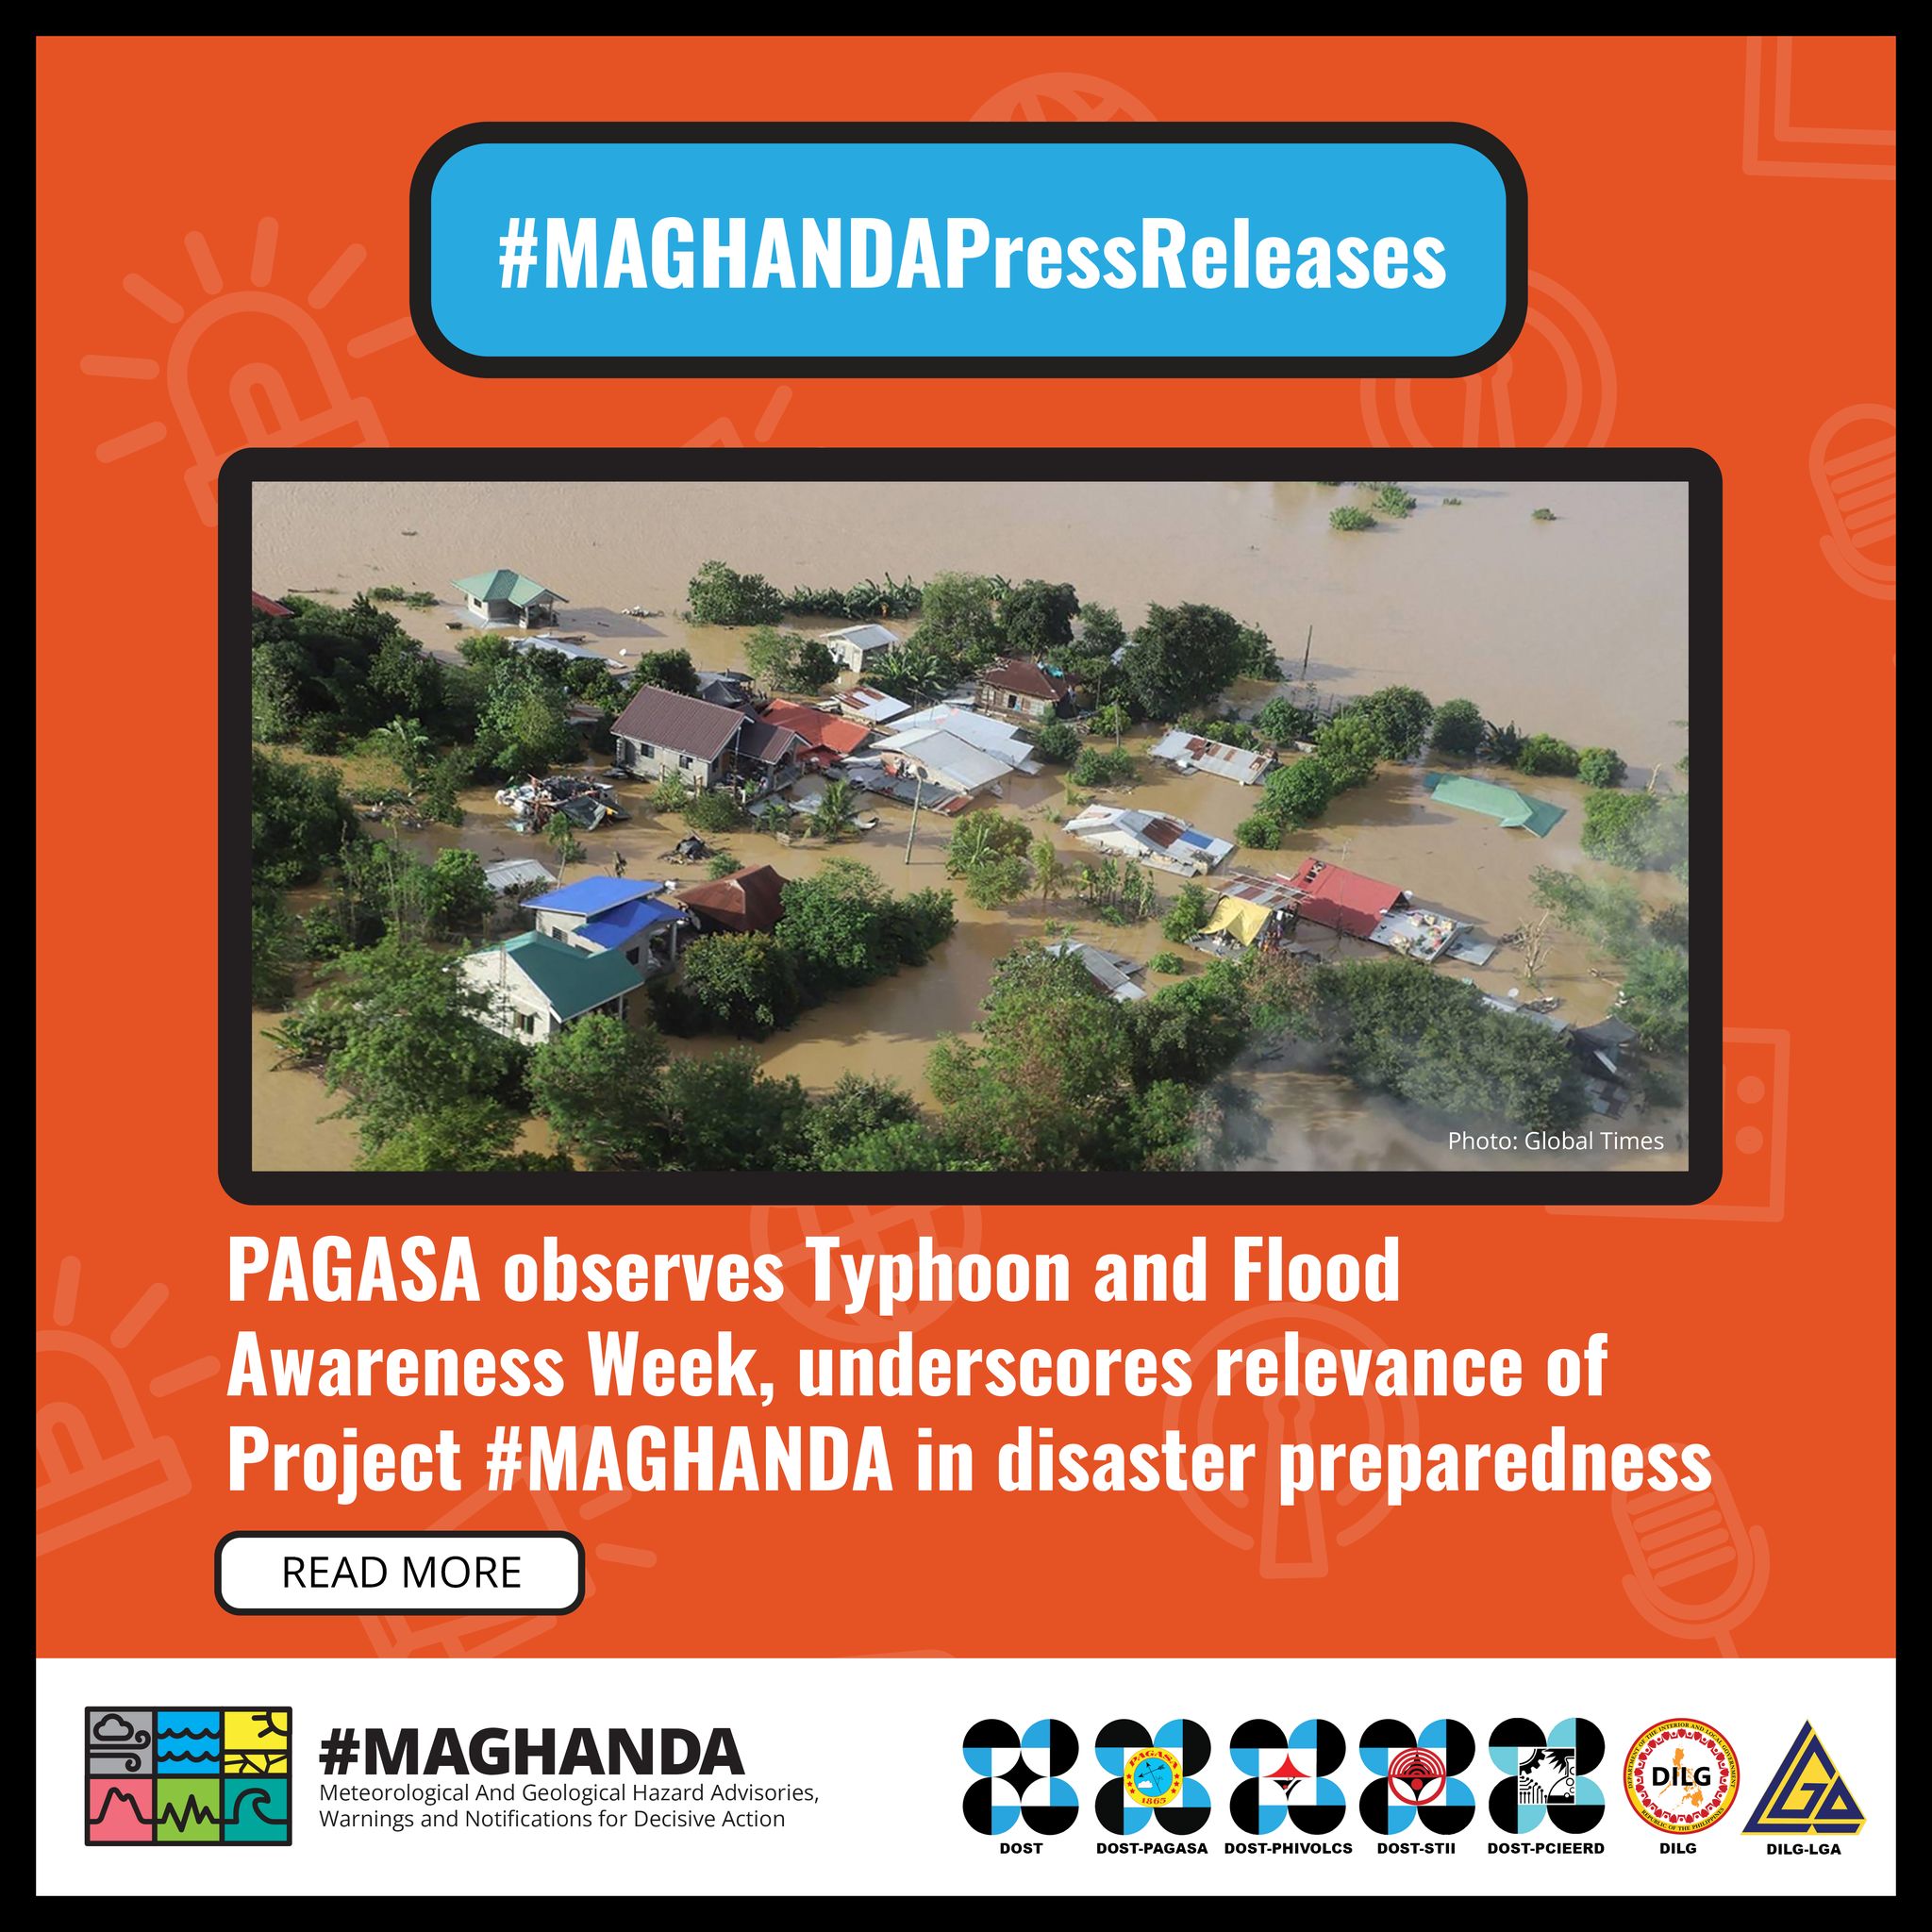 PAGASA observes Typhoon and Flood Awareness Week, underscores relevance of Project #MAGHANDA in disaster preparedness image